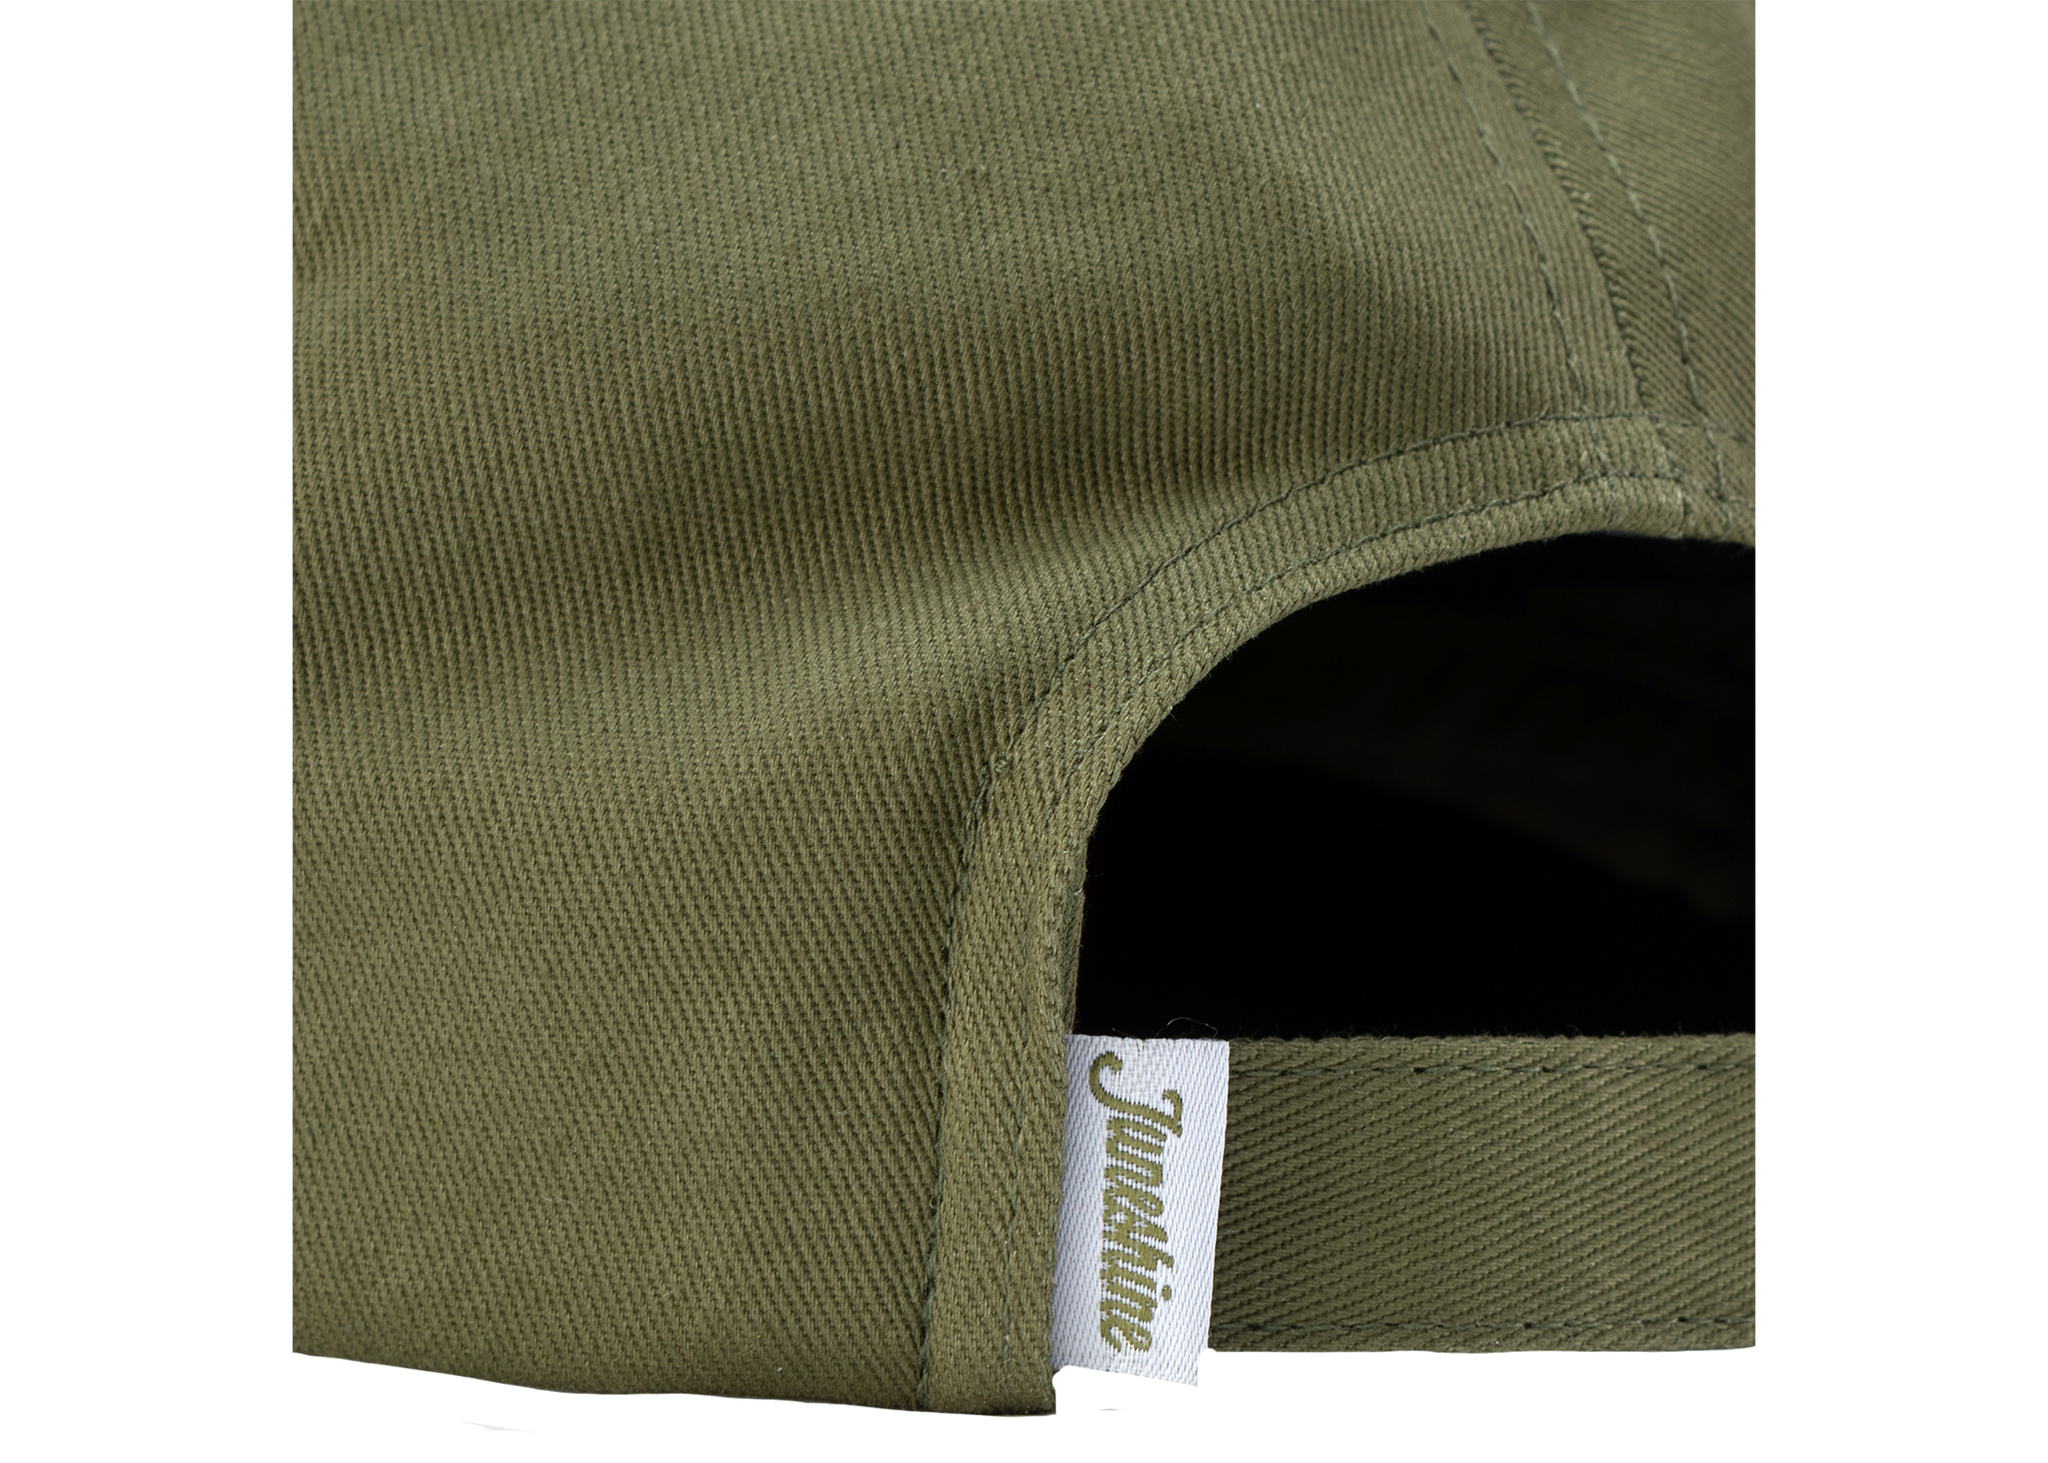 Close up image of back of green hat with adjustable strap and tag that reads: "June Shine"